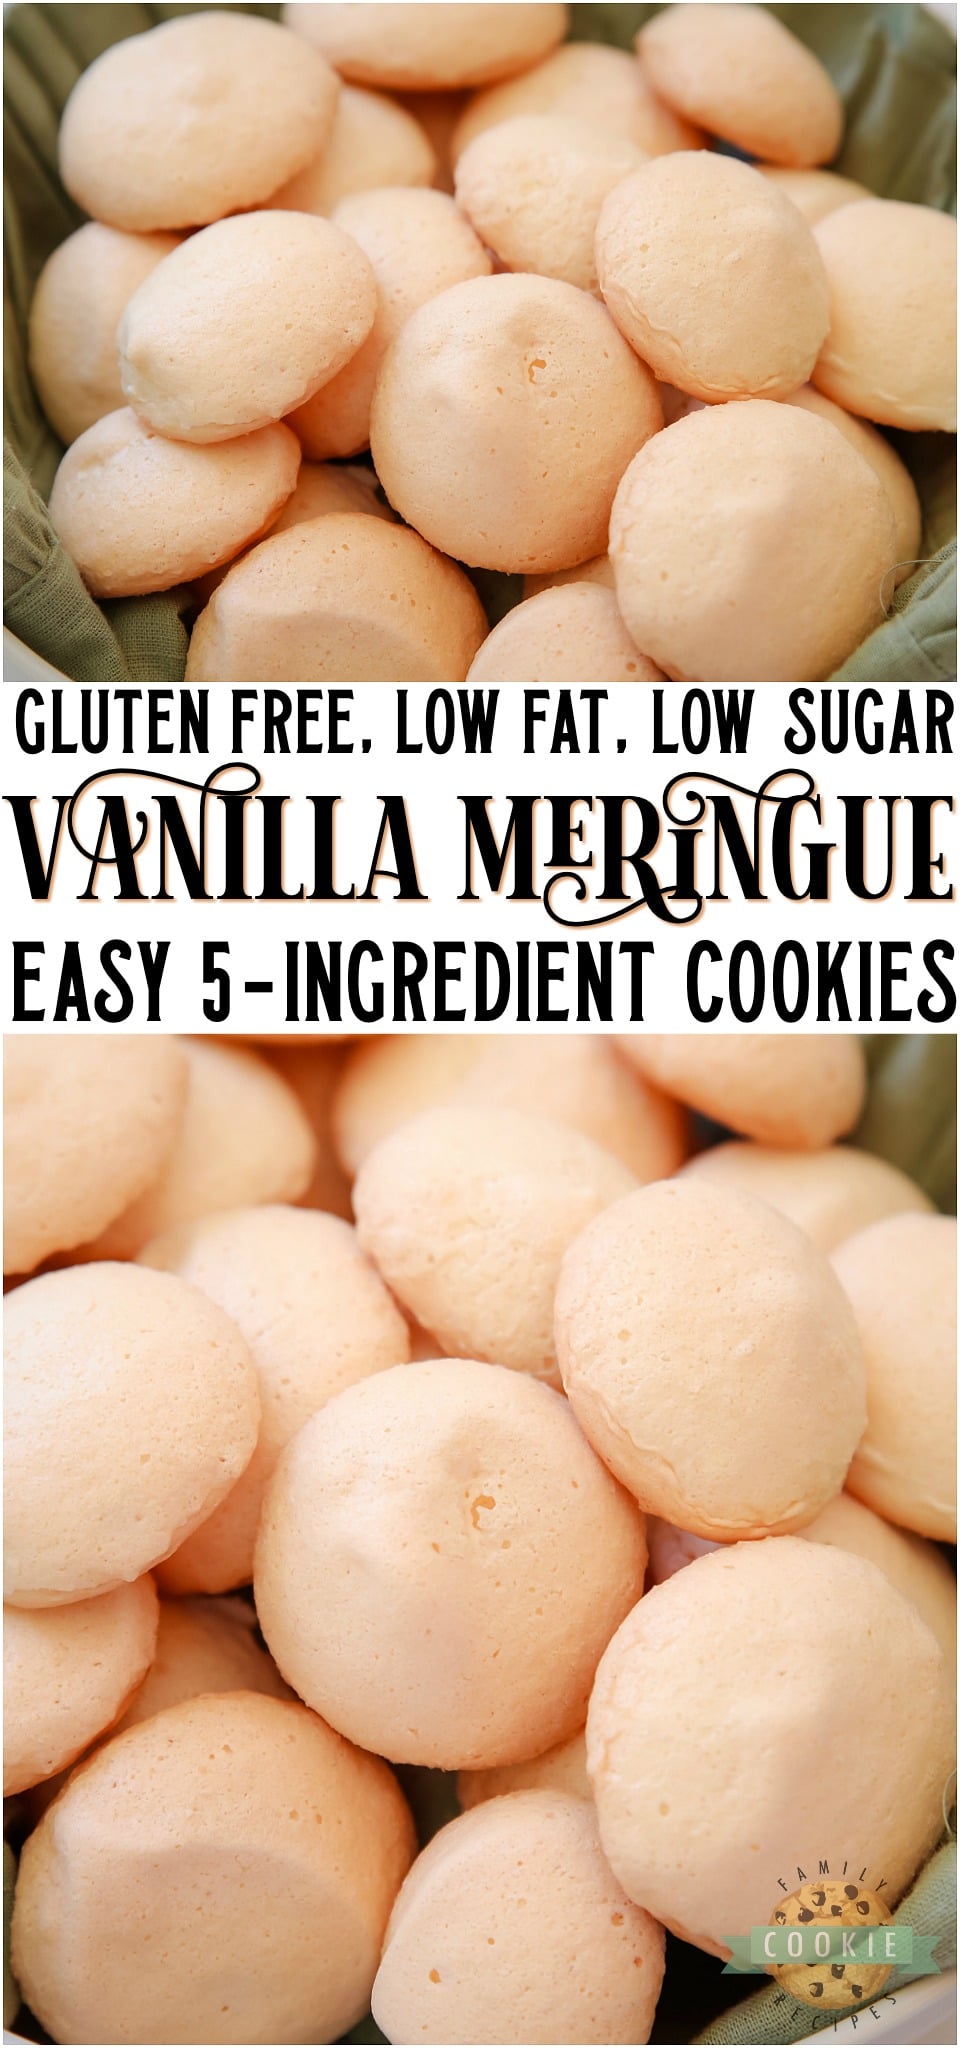 Easy Vanilla Meringue Cookies made with just 5 ingredients that you probably already have in your pantry! Simple gluten free, low fat, low sugar meringue cookie recipe flavored with vanilla extract for a sweet, crisp and chewy treat.